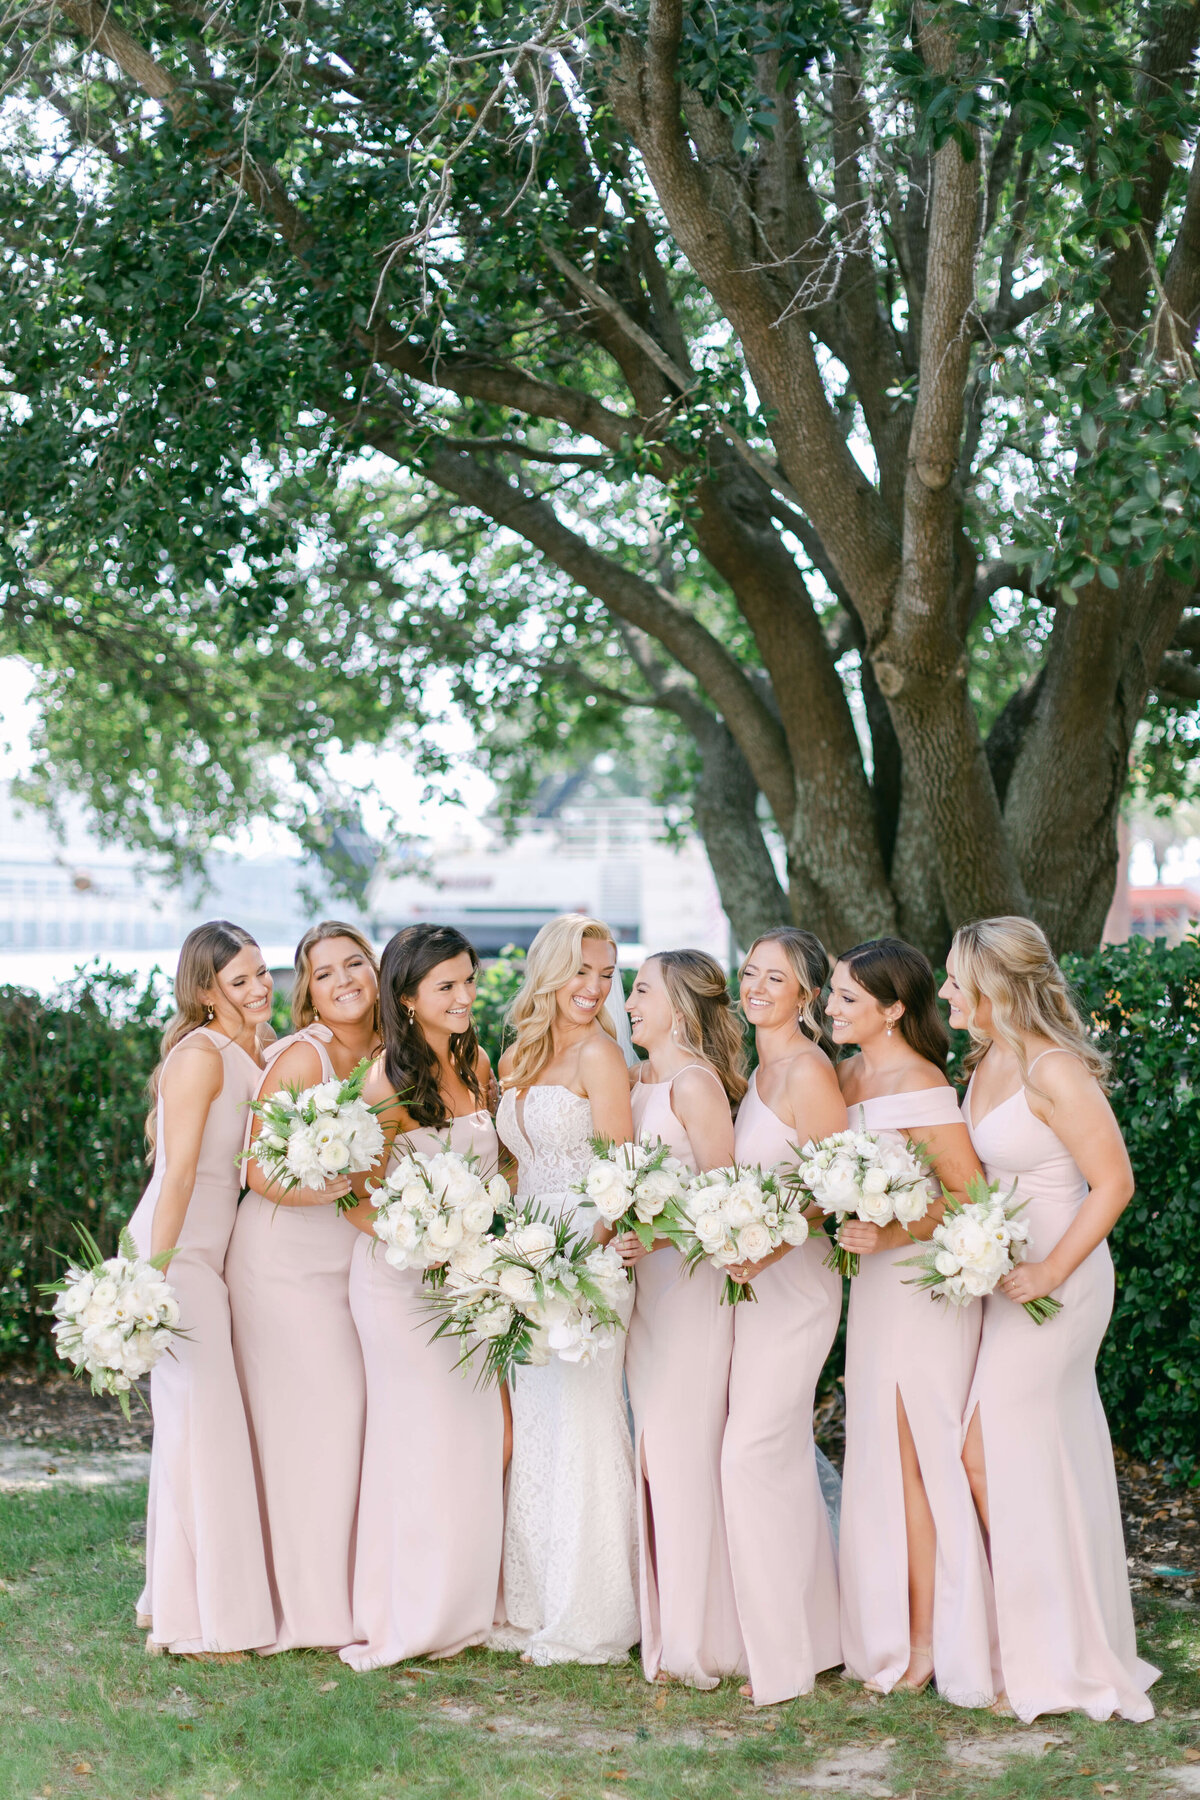 A bride huddles with her bridesmaids.